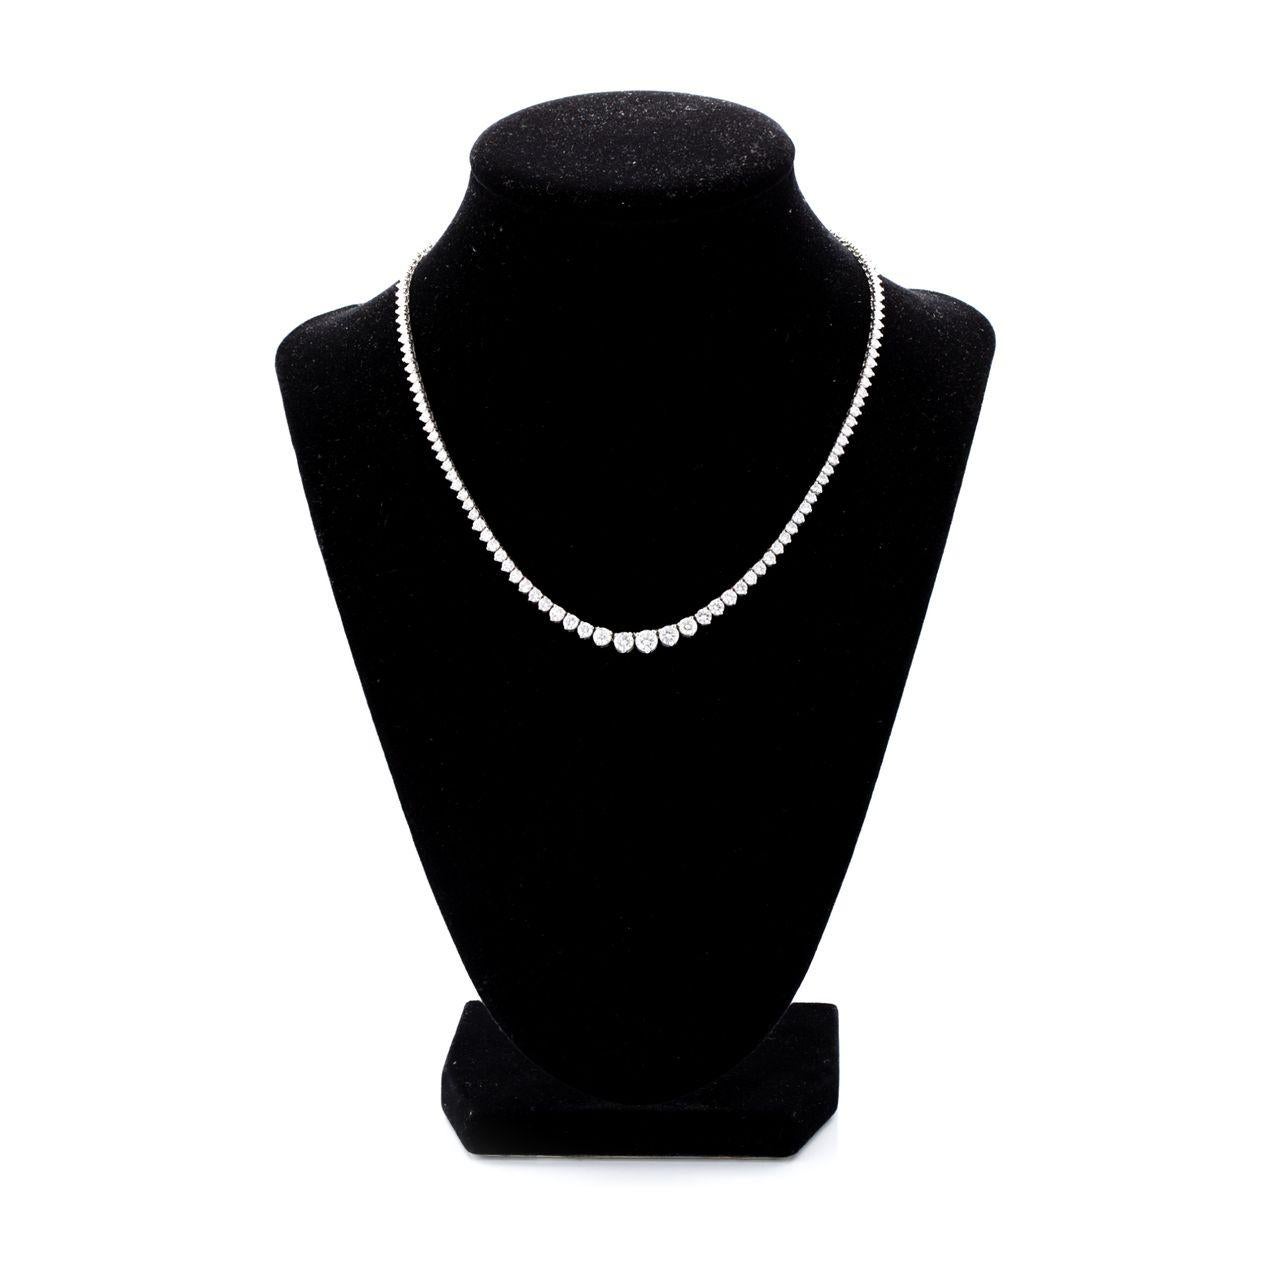 Platinum Elegant Graduated Diamond Tennis Necklace 
Total Carat Weight: 12.19ct 140st, 
Stones are F/G color VS/VVS clarity full cut natural diamonds
Mounted in Platinum
Biggest stone is 5.00mm - smallest 2.7mm 
16